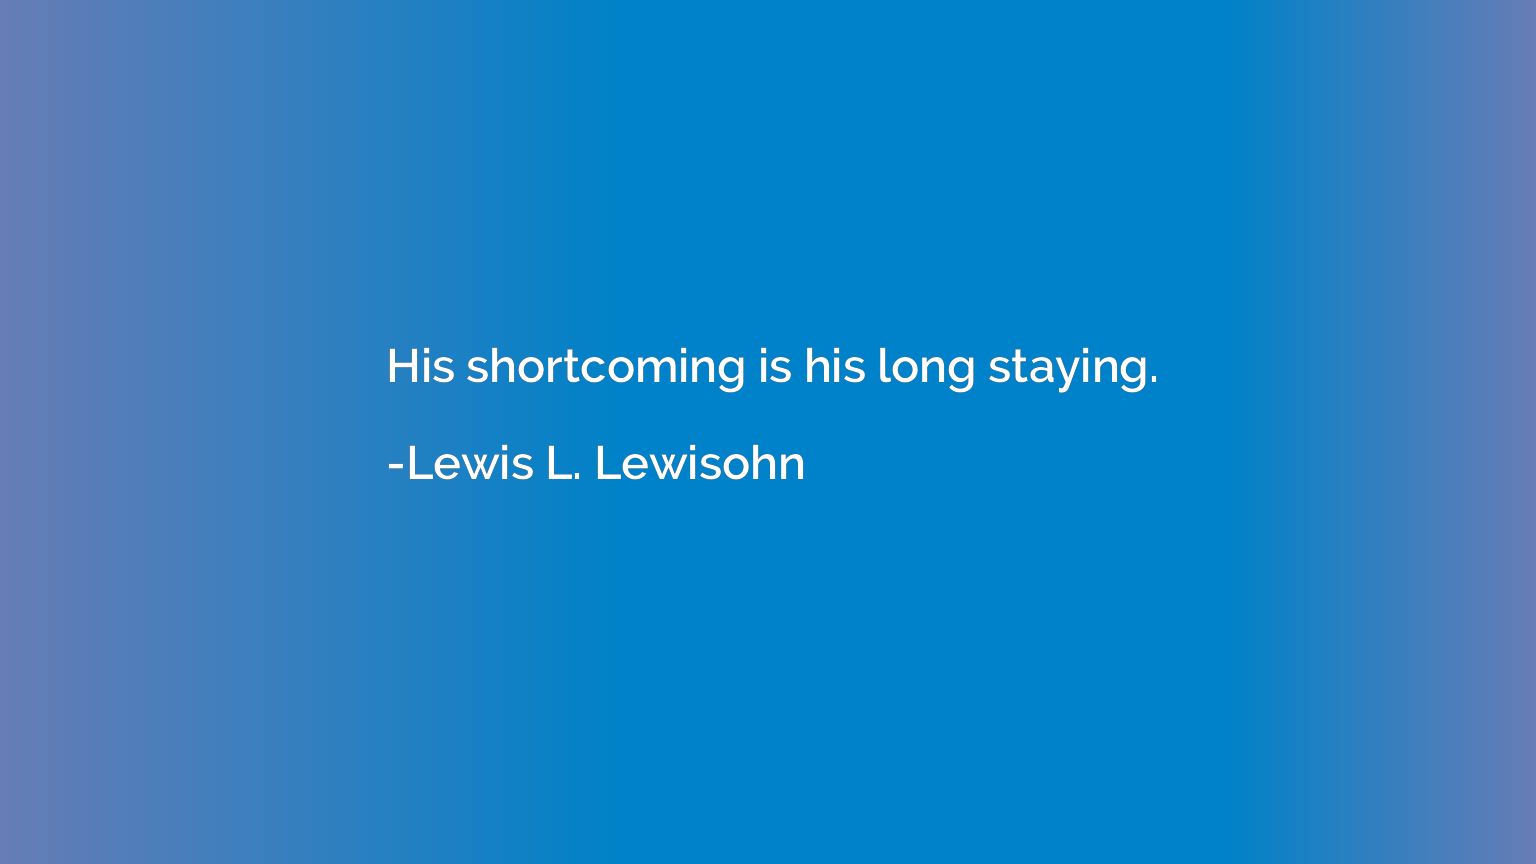 His shortcoming is his long staying.